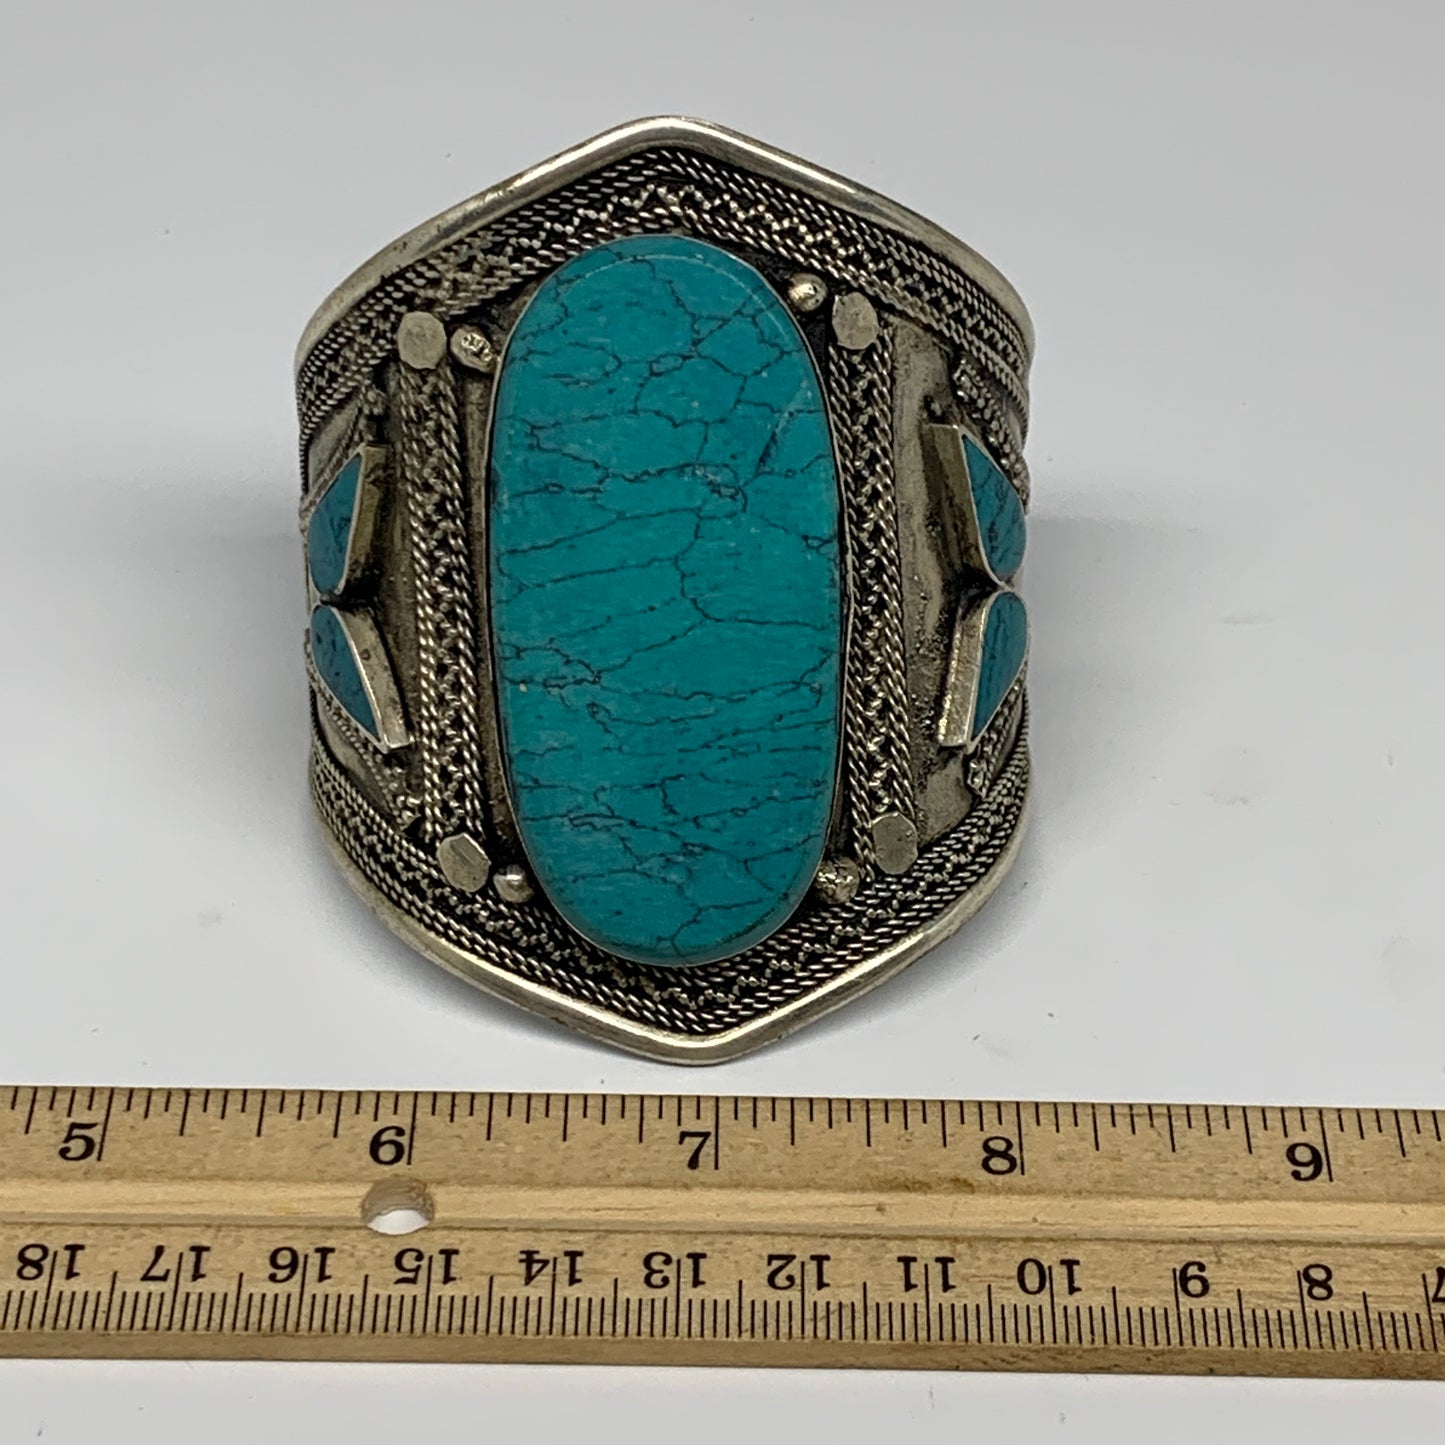 59.7g, 3.2" Vintage Reproduced Afghan Turkmen Synthetic Turquoise Cuff Bracelet,